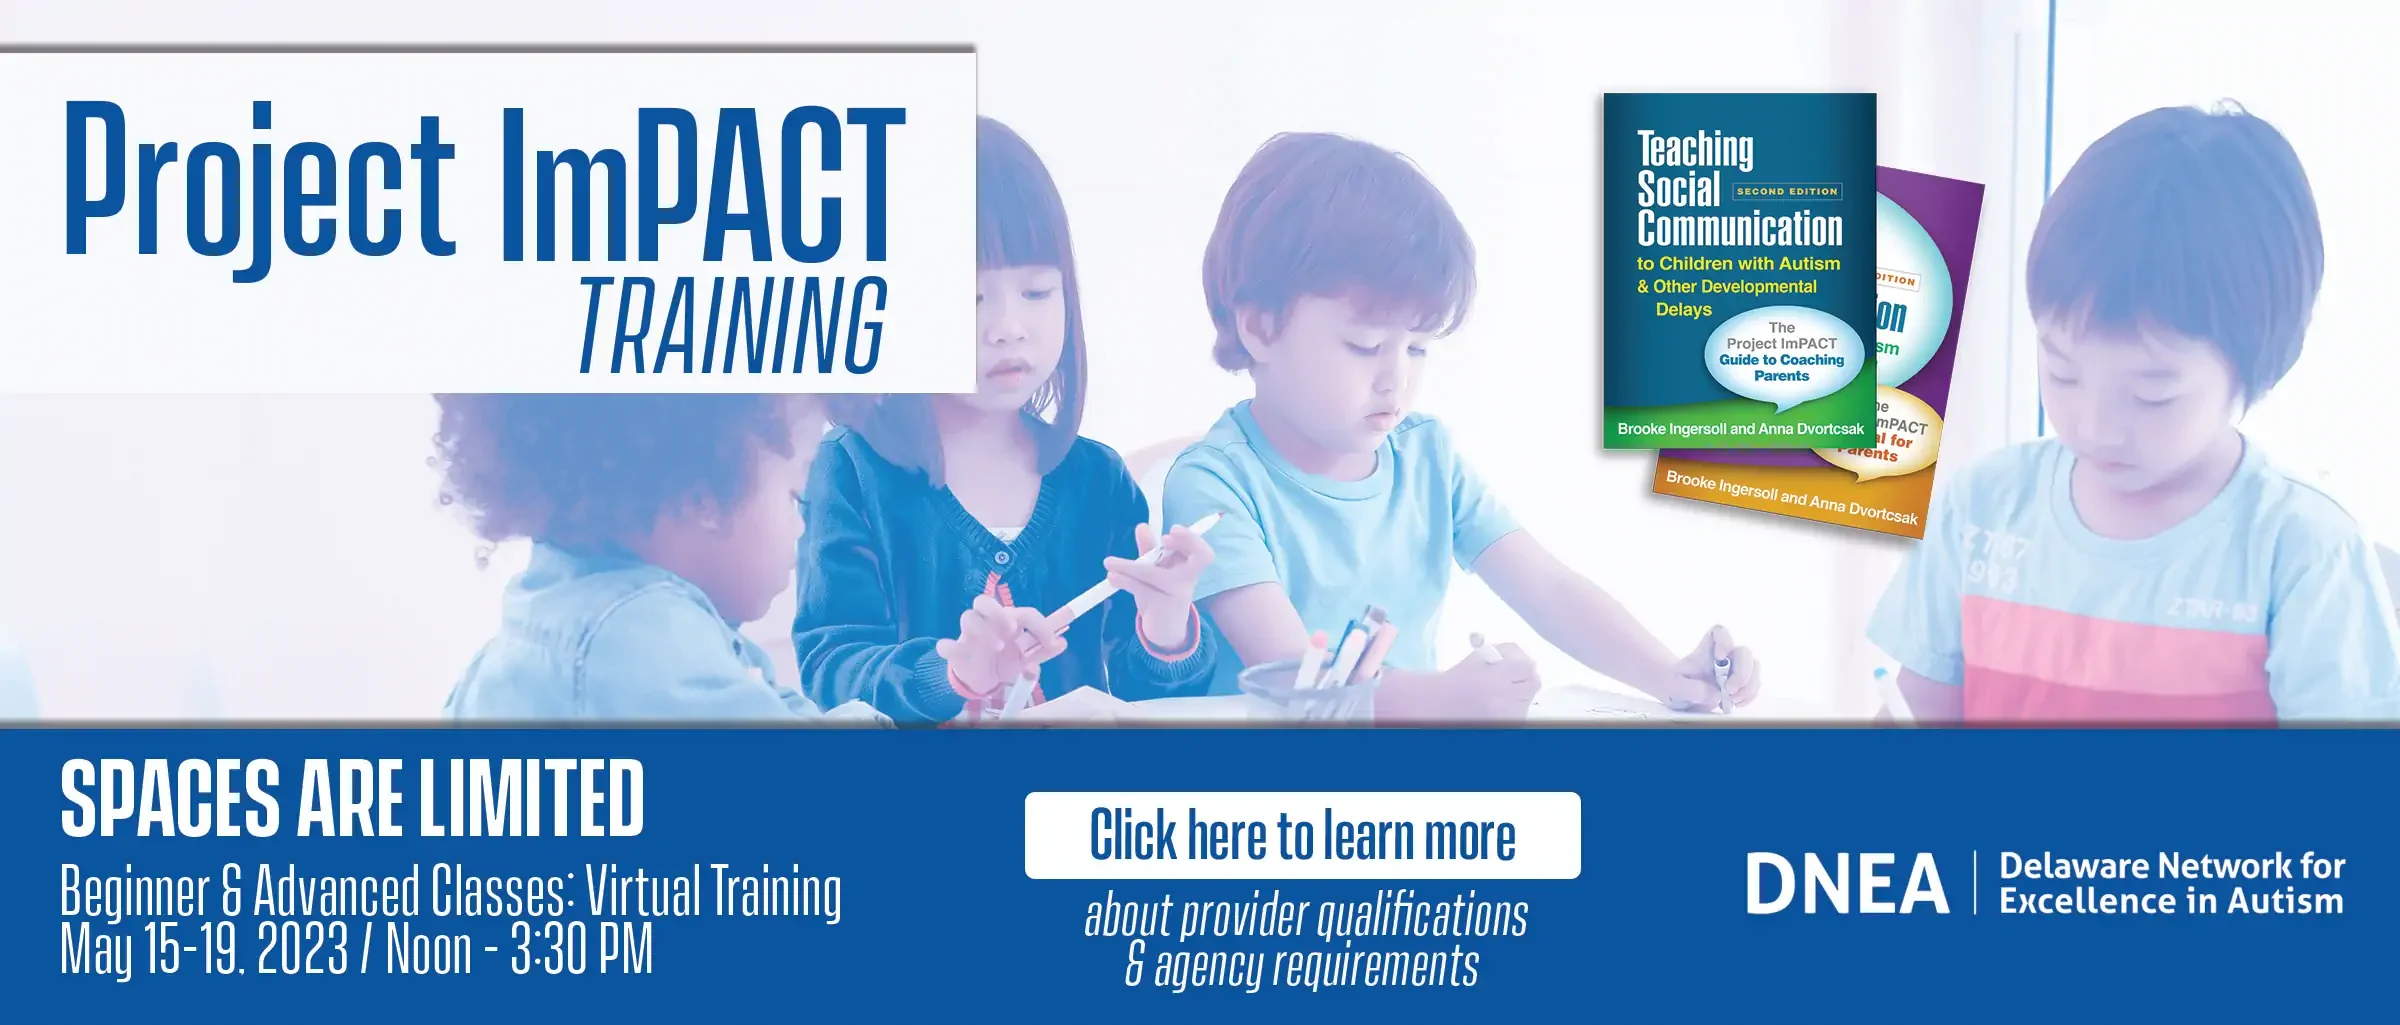 Project Impact beginner and virtual training May 15-19 noon-3:30 pm. Click here to learn more.